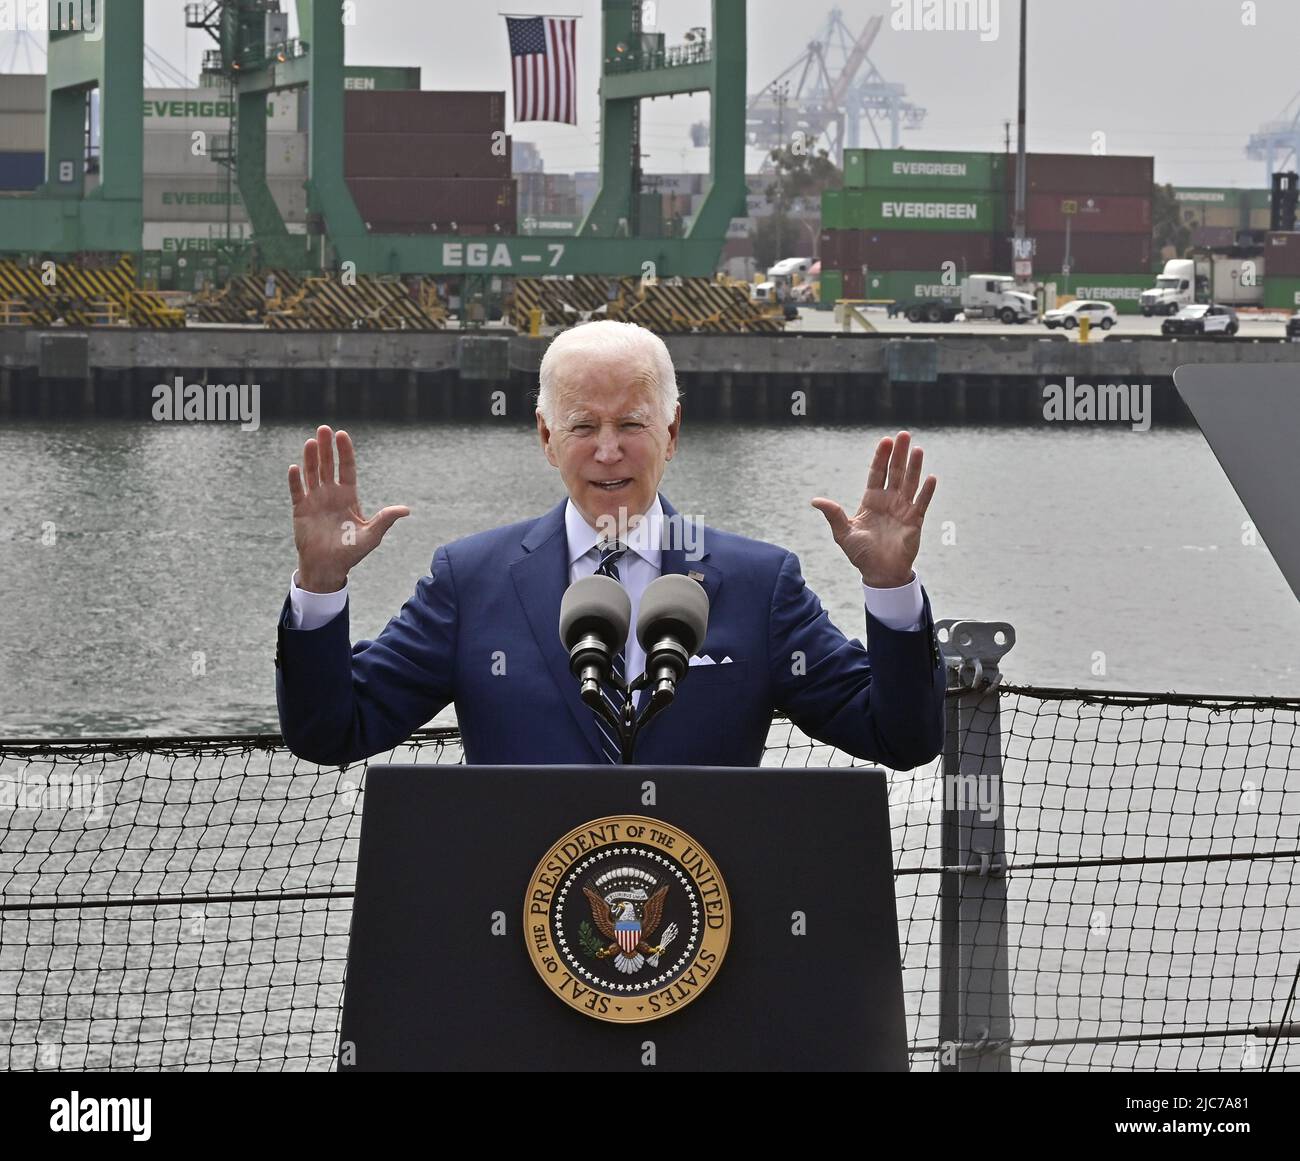 San Pedro, USA. 10th June, 2022. President Joe Biden discusses efforts to streamline global supply chains and counter rising prices, painting the issue as a worldwide problem fueled by Russian aggression in Ukraine aboard the Battleship Iowa museum in San Pedro, California on Friday, June 10, 2022. Biden referred to 'Putin's Price Hike'' for driving up the cost of energy and food, which he said accounted for the vast majority of 8.6% inflation rate in May compared to the same month a year ago. Photo by Jim Ruymen/UPI. Credit: UPI/Alamy Live News Stock Photo